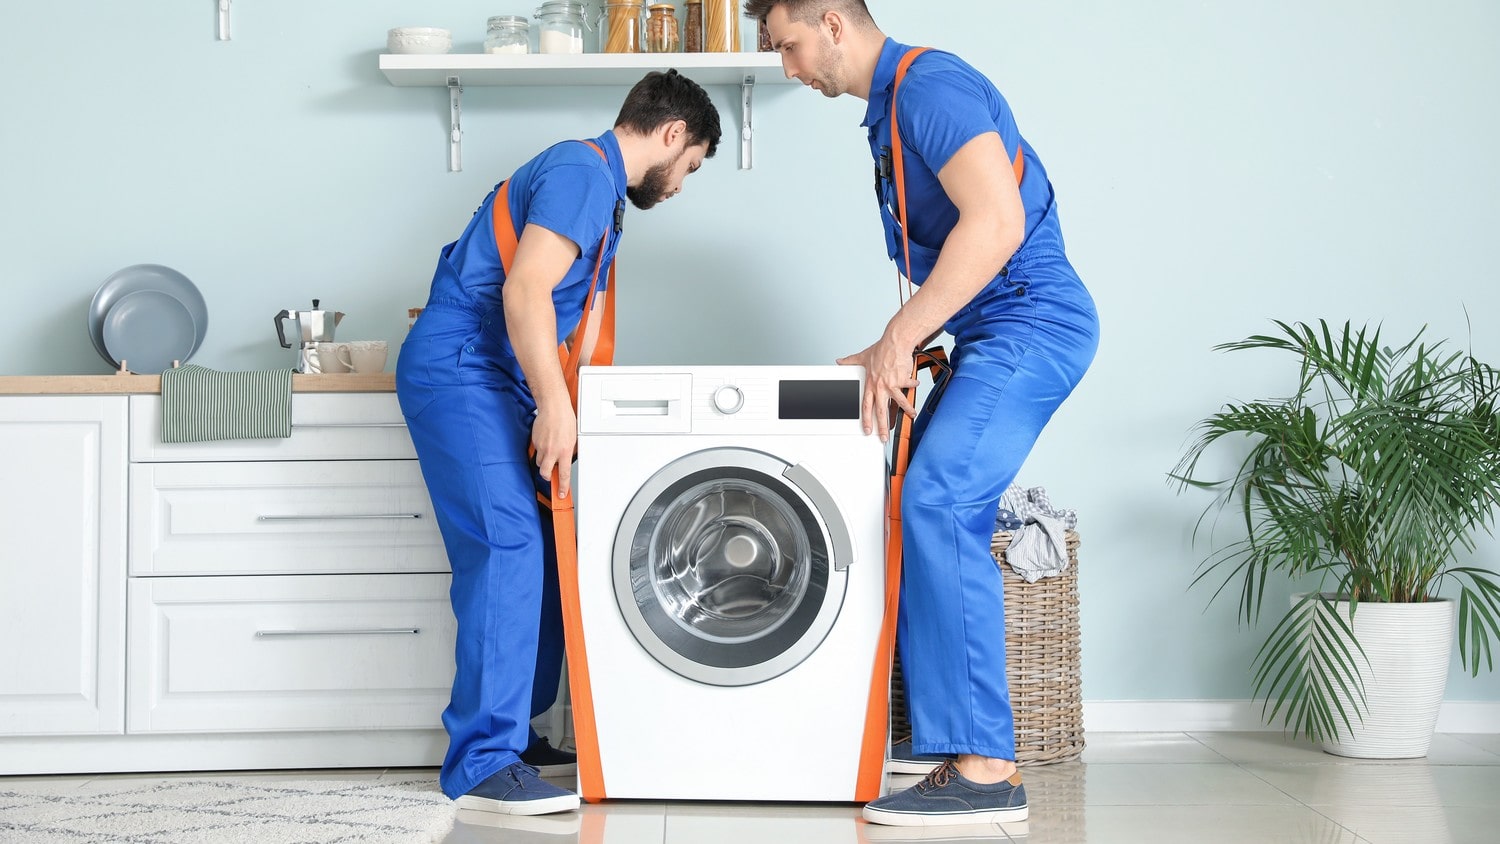 Two people on straps carrying a washing machine